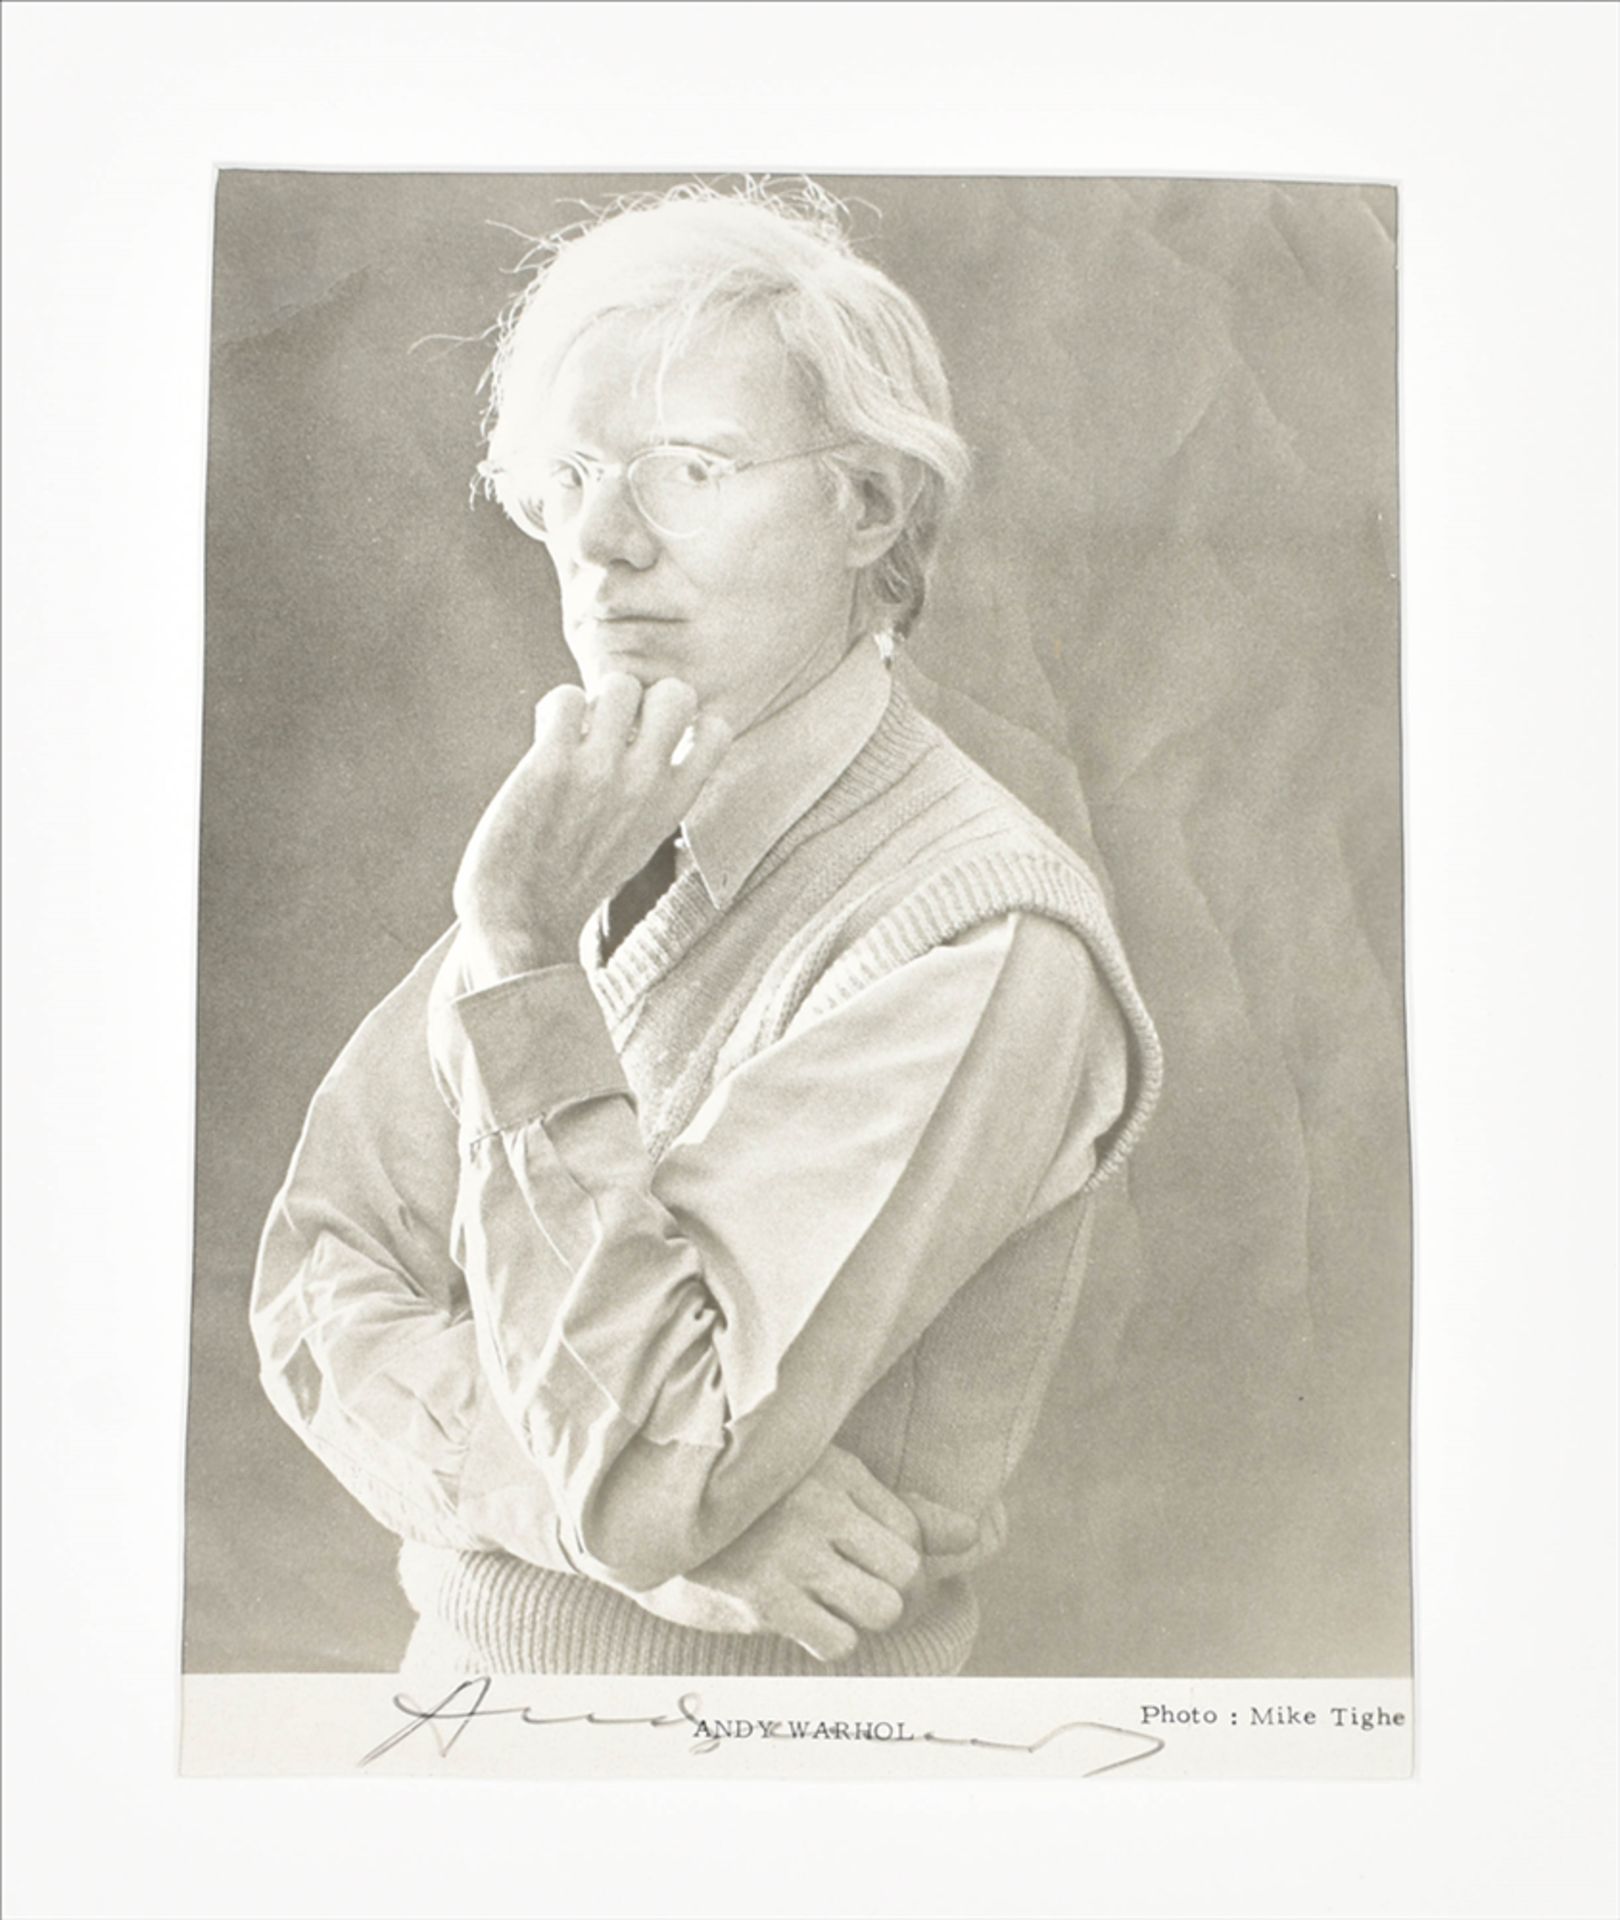 Michael Tighe, Andy Warhol photo portrait, ca. 1980. Signed by Warhol